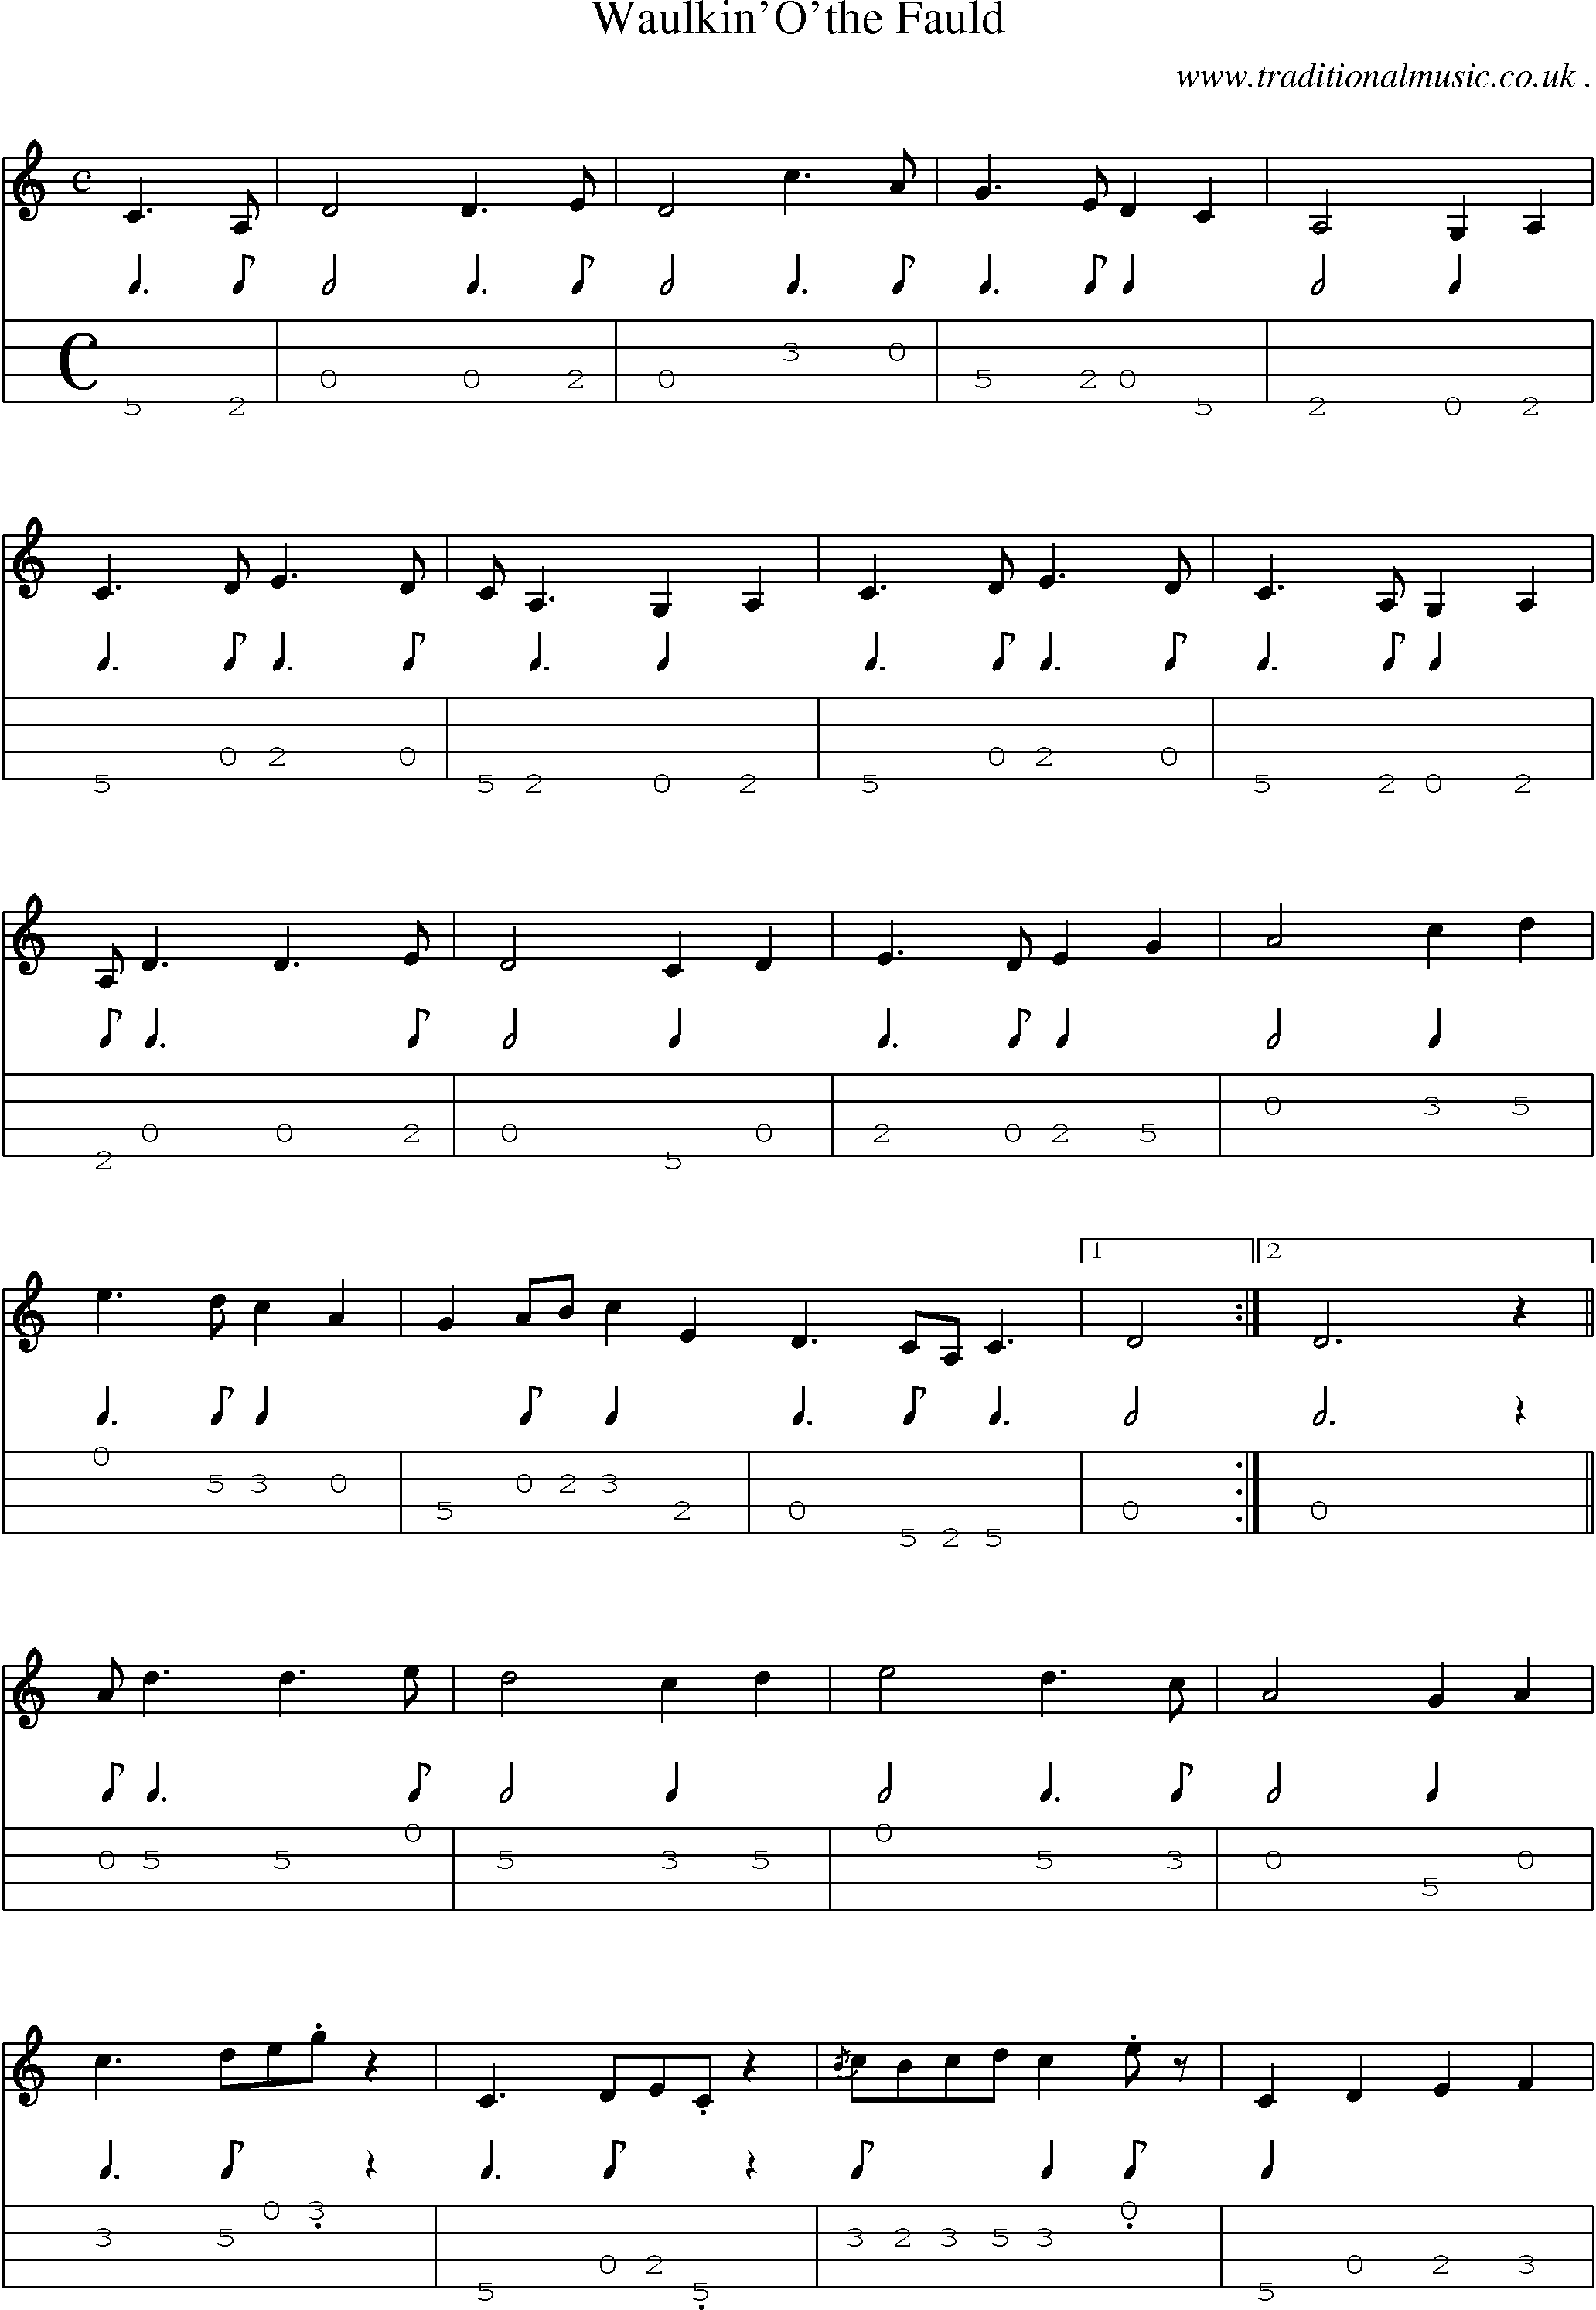 Sheet-music  score, Chords and Mandolin Tabs for Waulkinothe Fauld